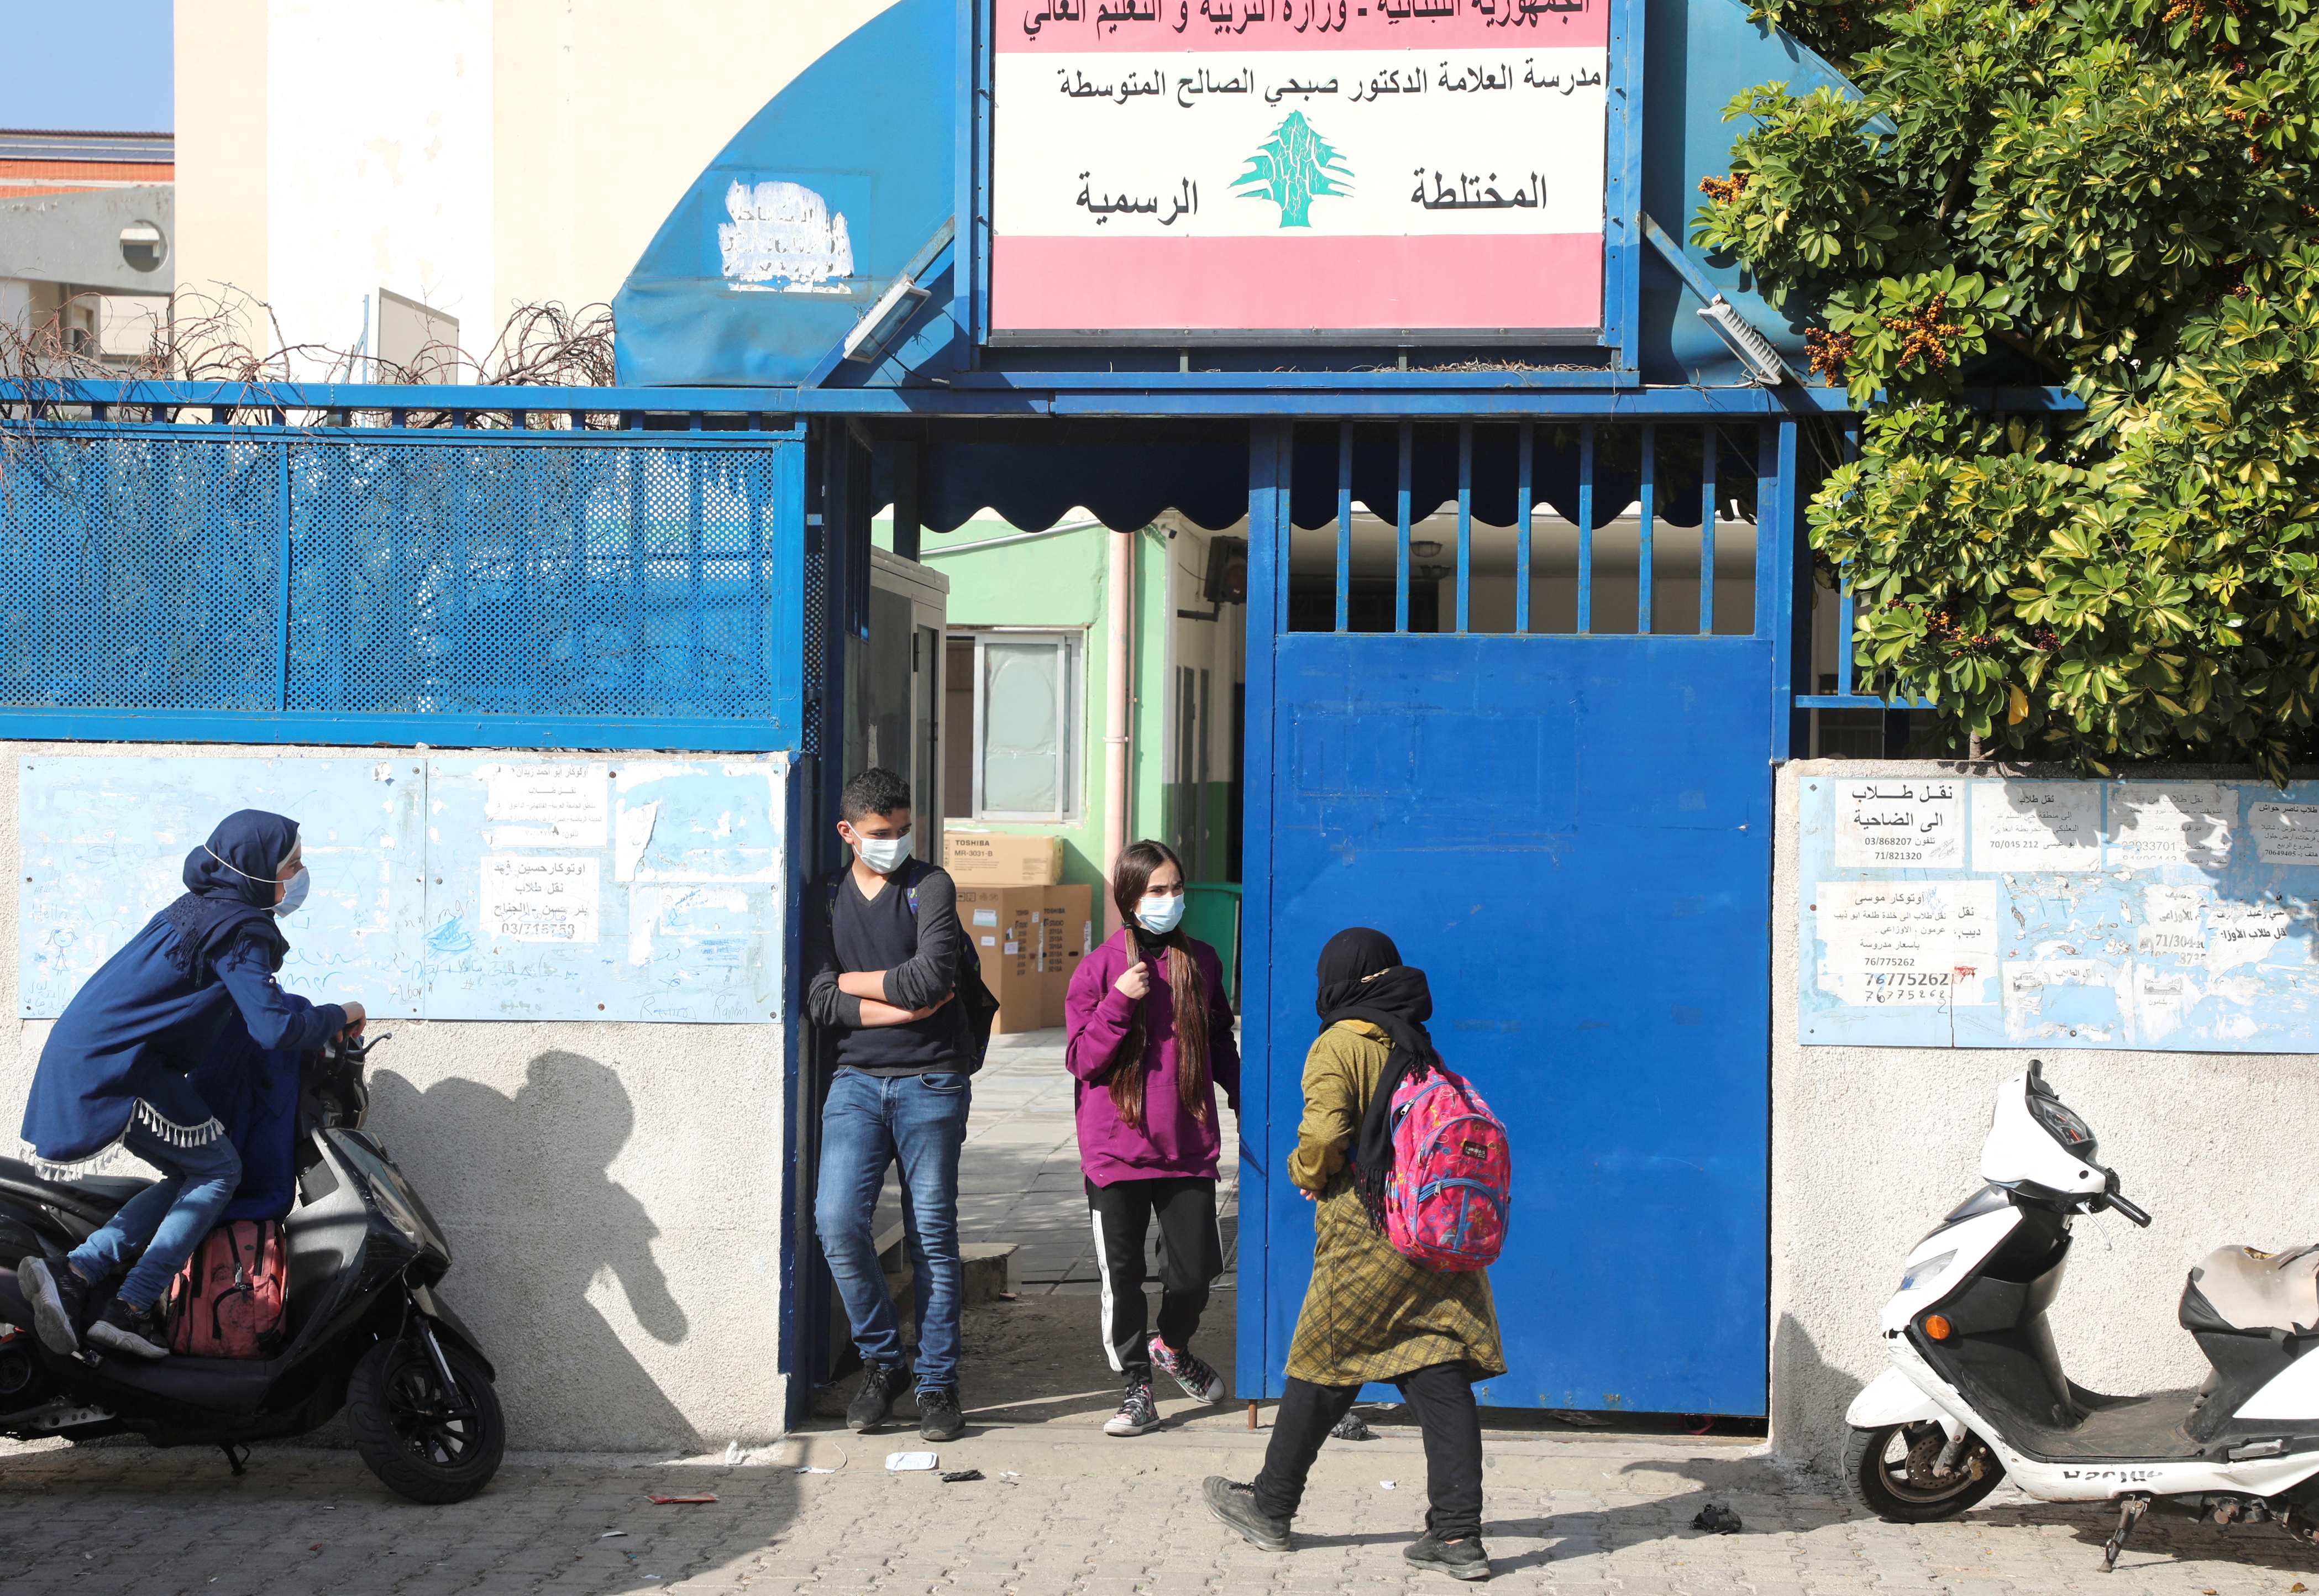 Students walk at the entrance of a public school in Beirut